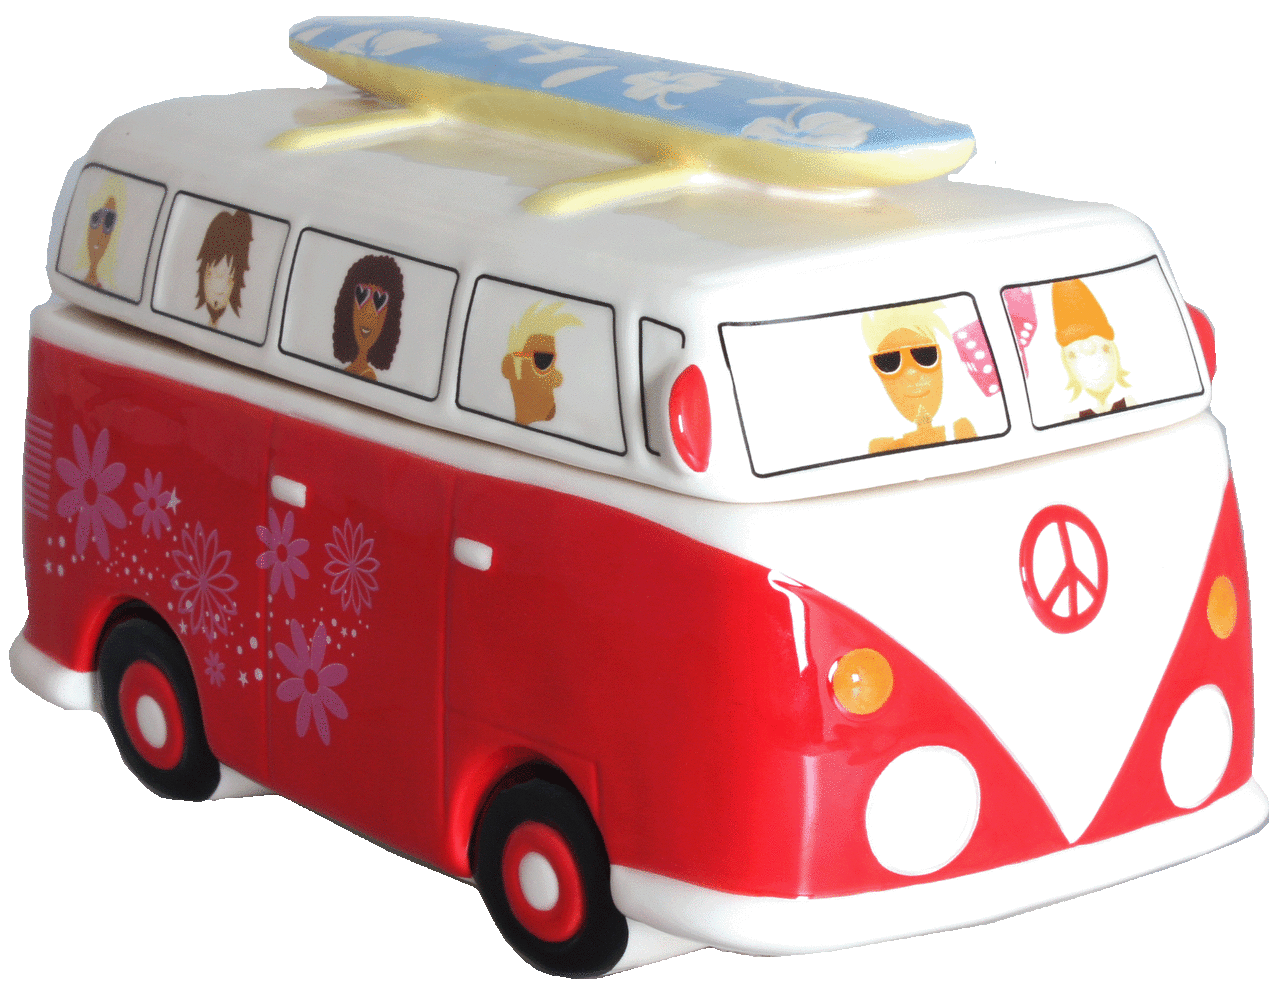 https://cdn.lowgif.com/small/772e4f7a2da4632a-campervan-gift-red-campervan-cookie-jar-with-biscuits-http-www.gif